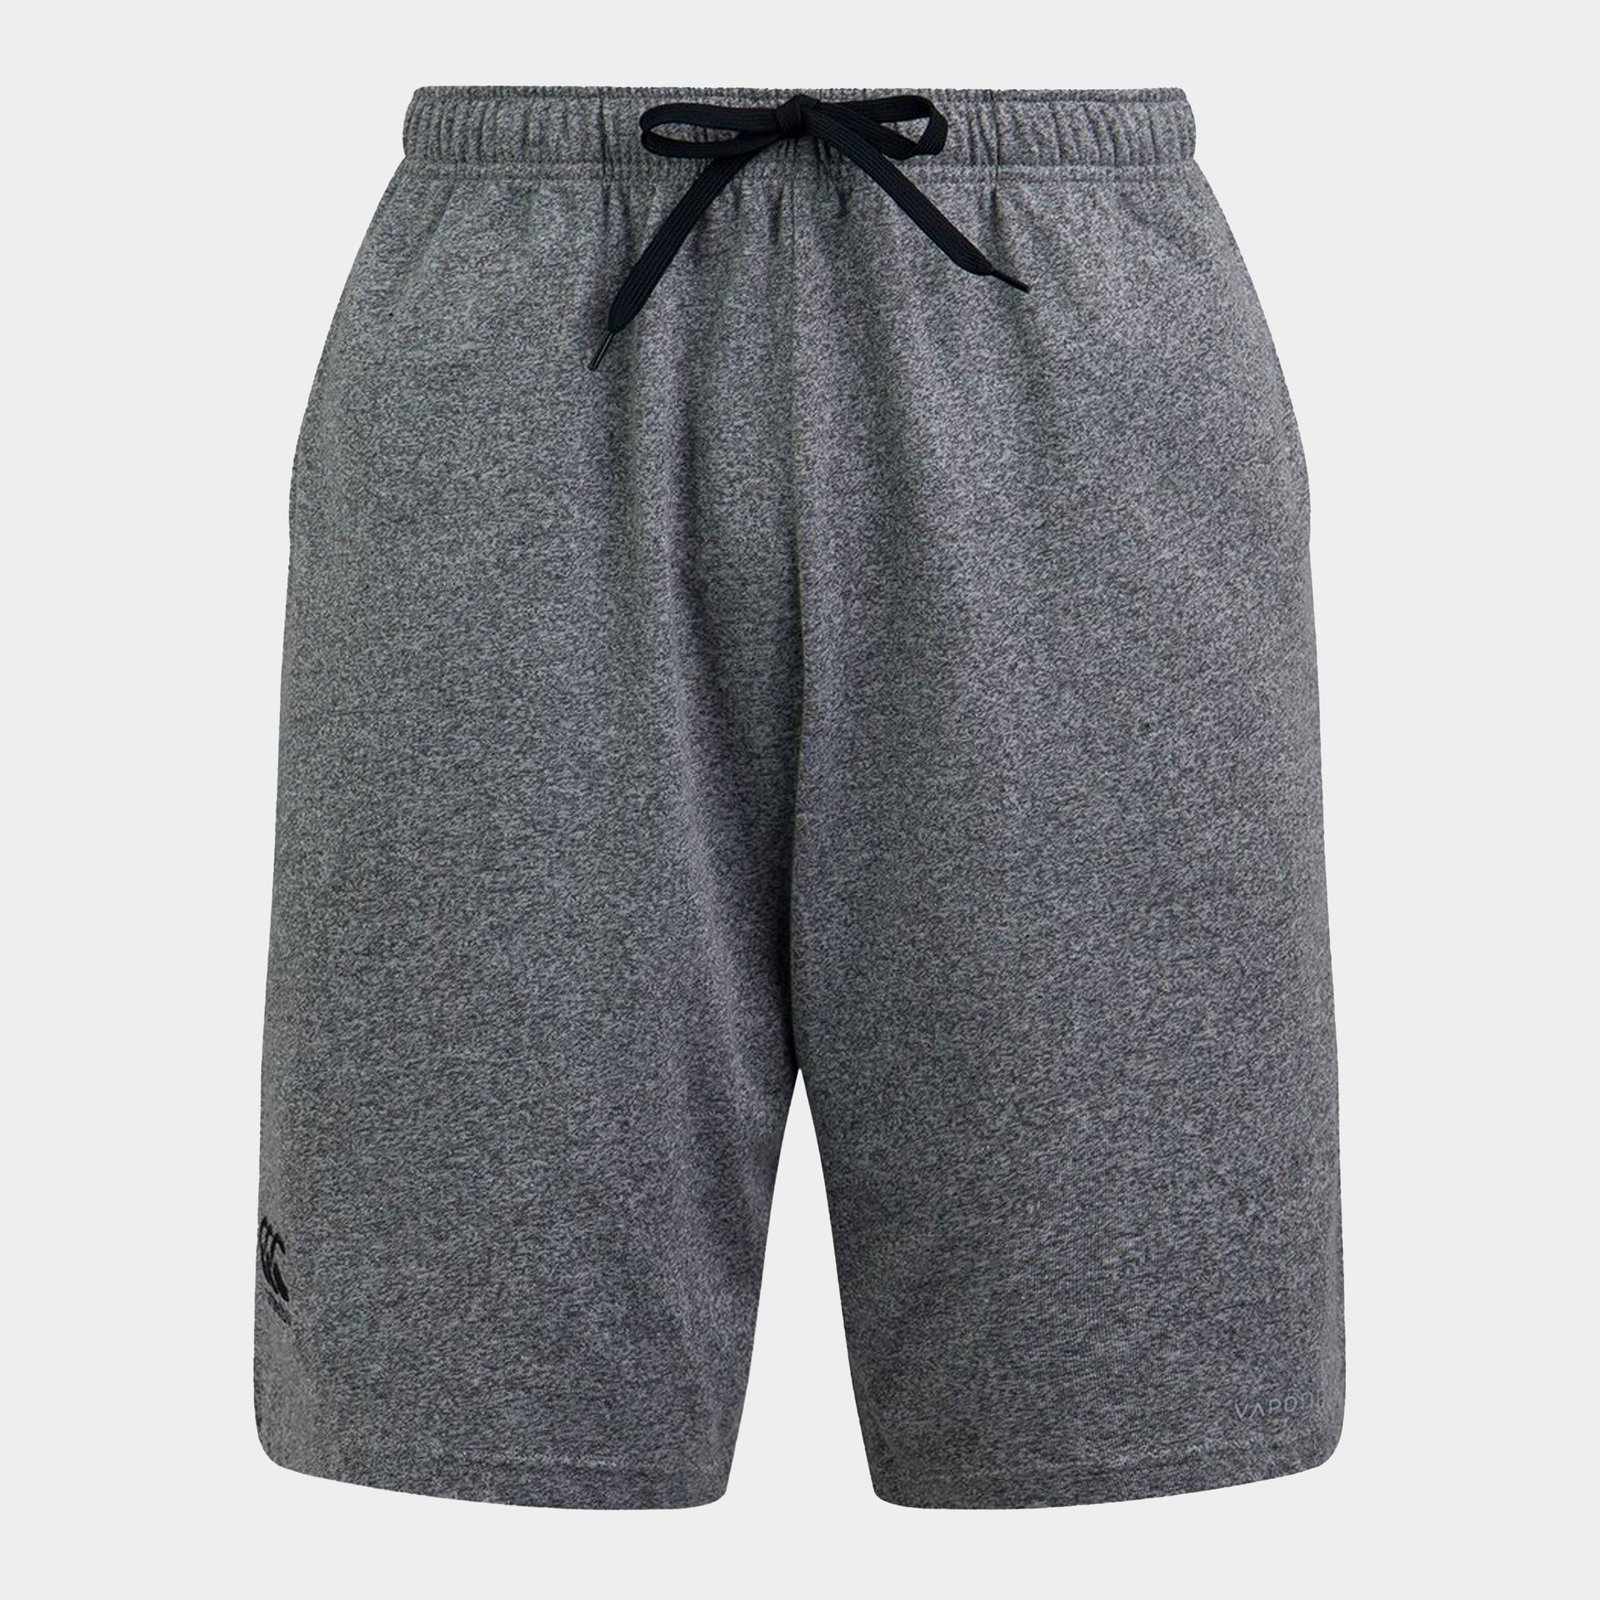 Mens Shorts - Lovell Rugby